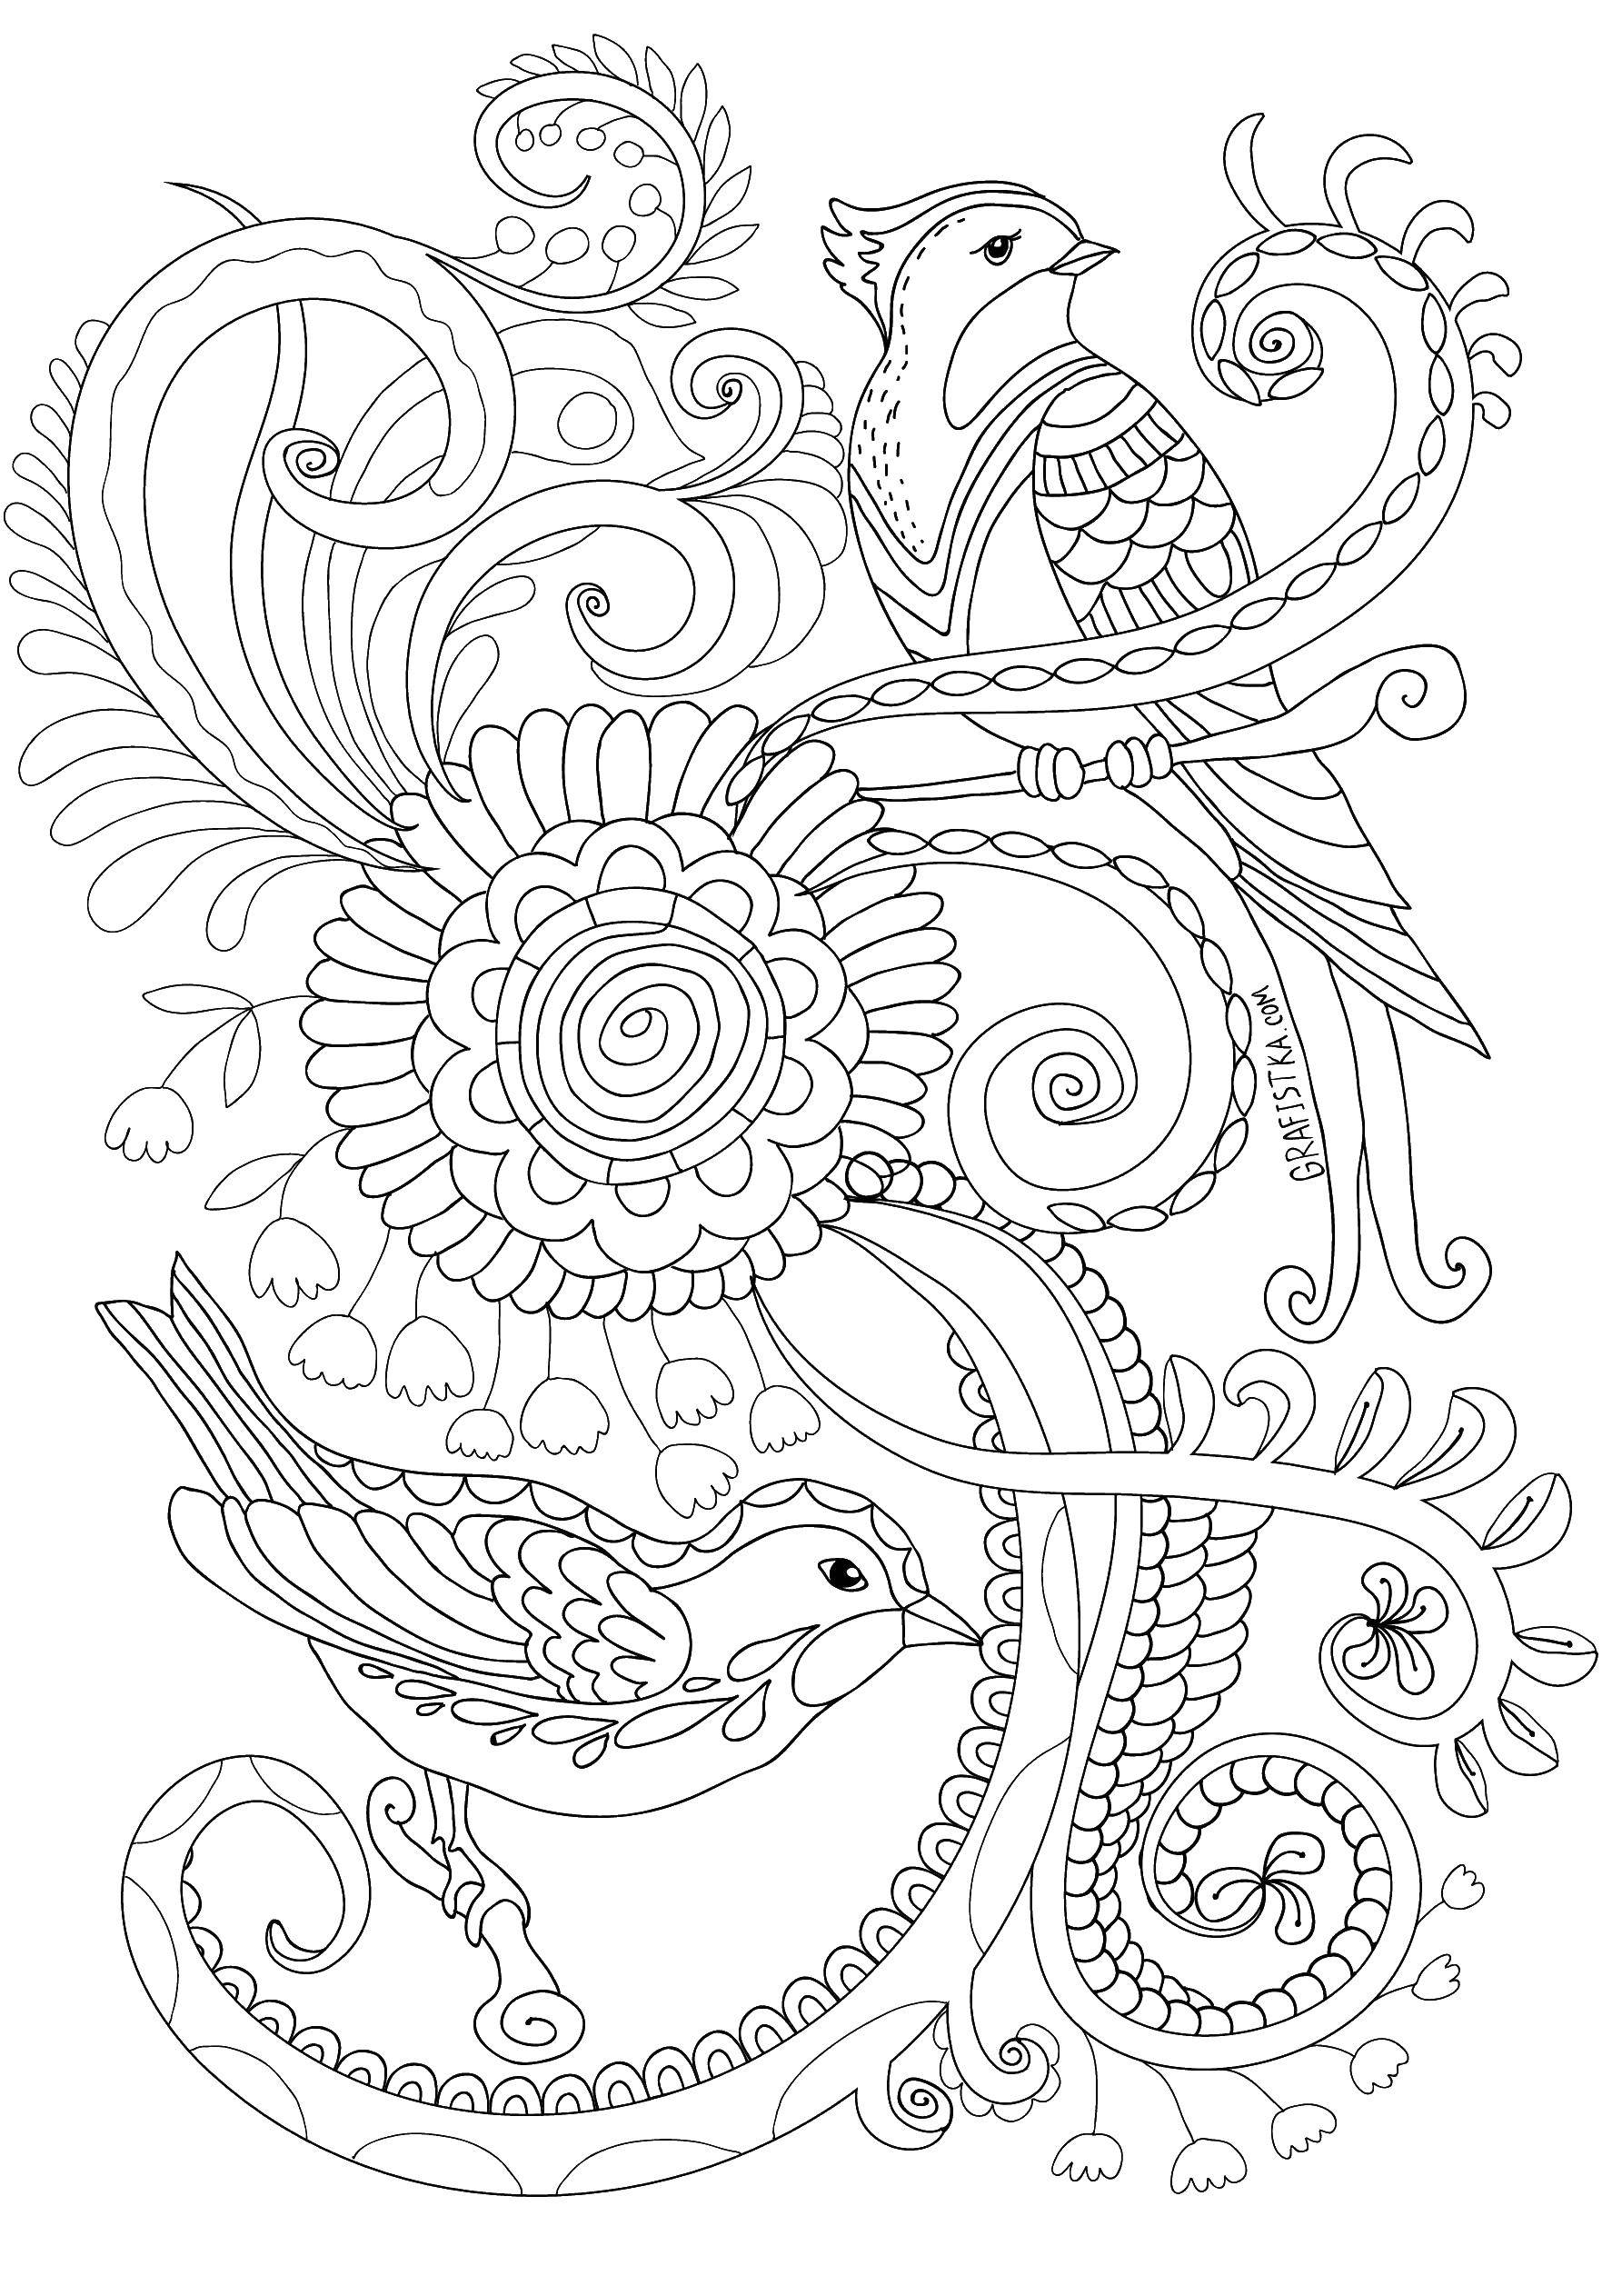 Coloring Canaries. Category coloring antistress. Tags:  coloring, anti-stress, poultry.